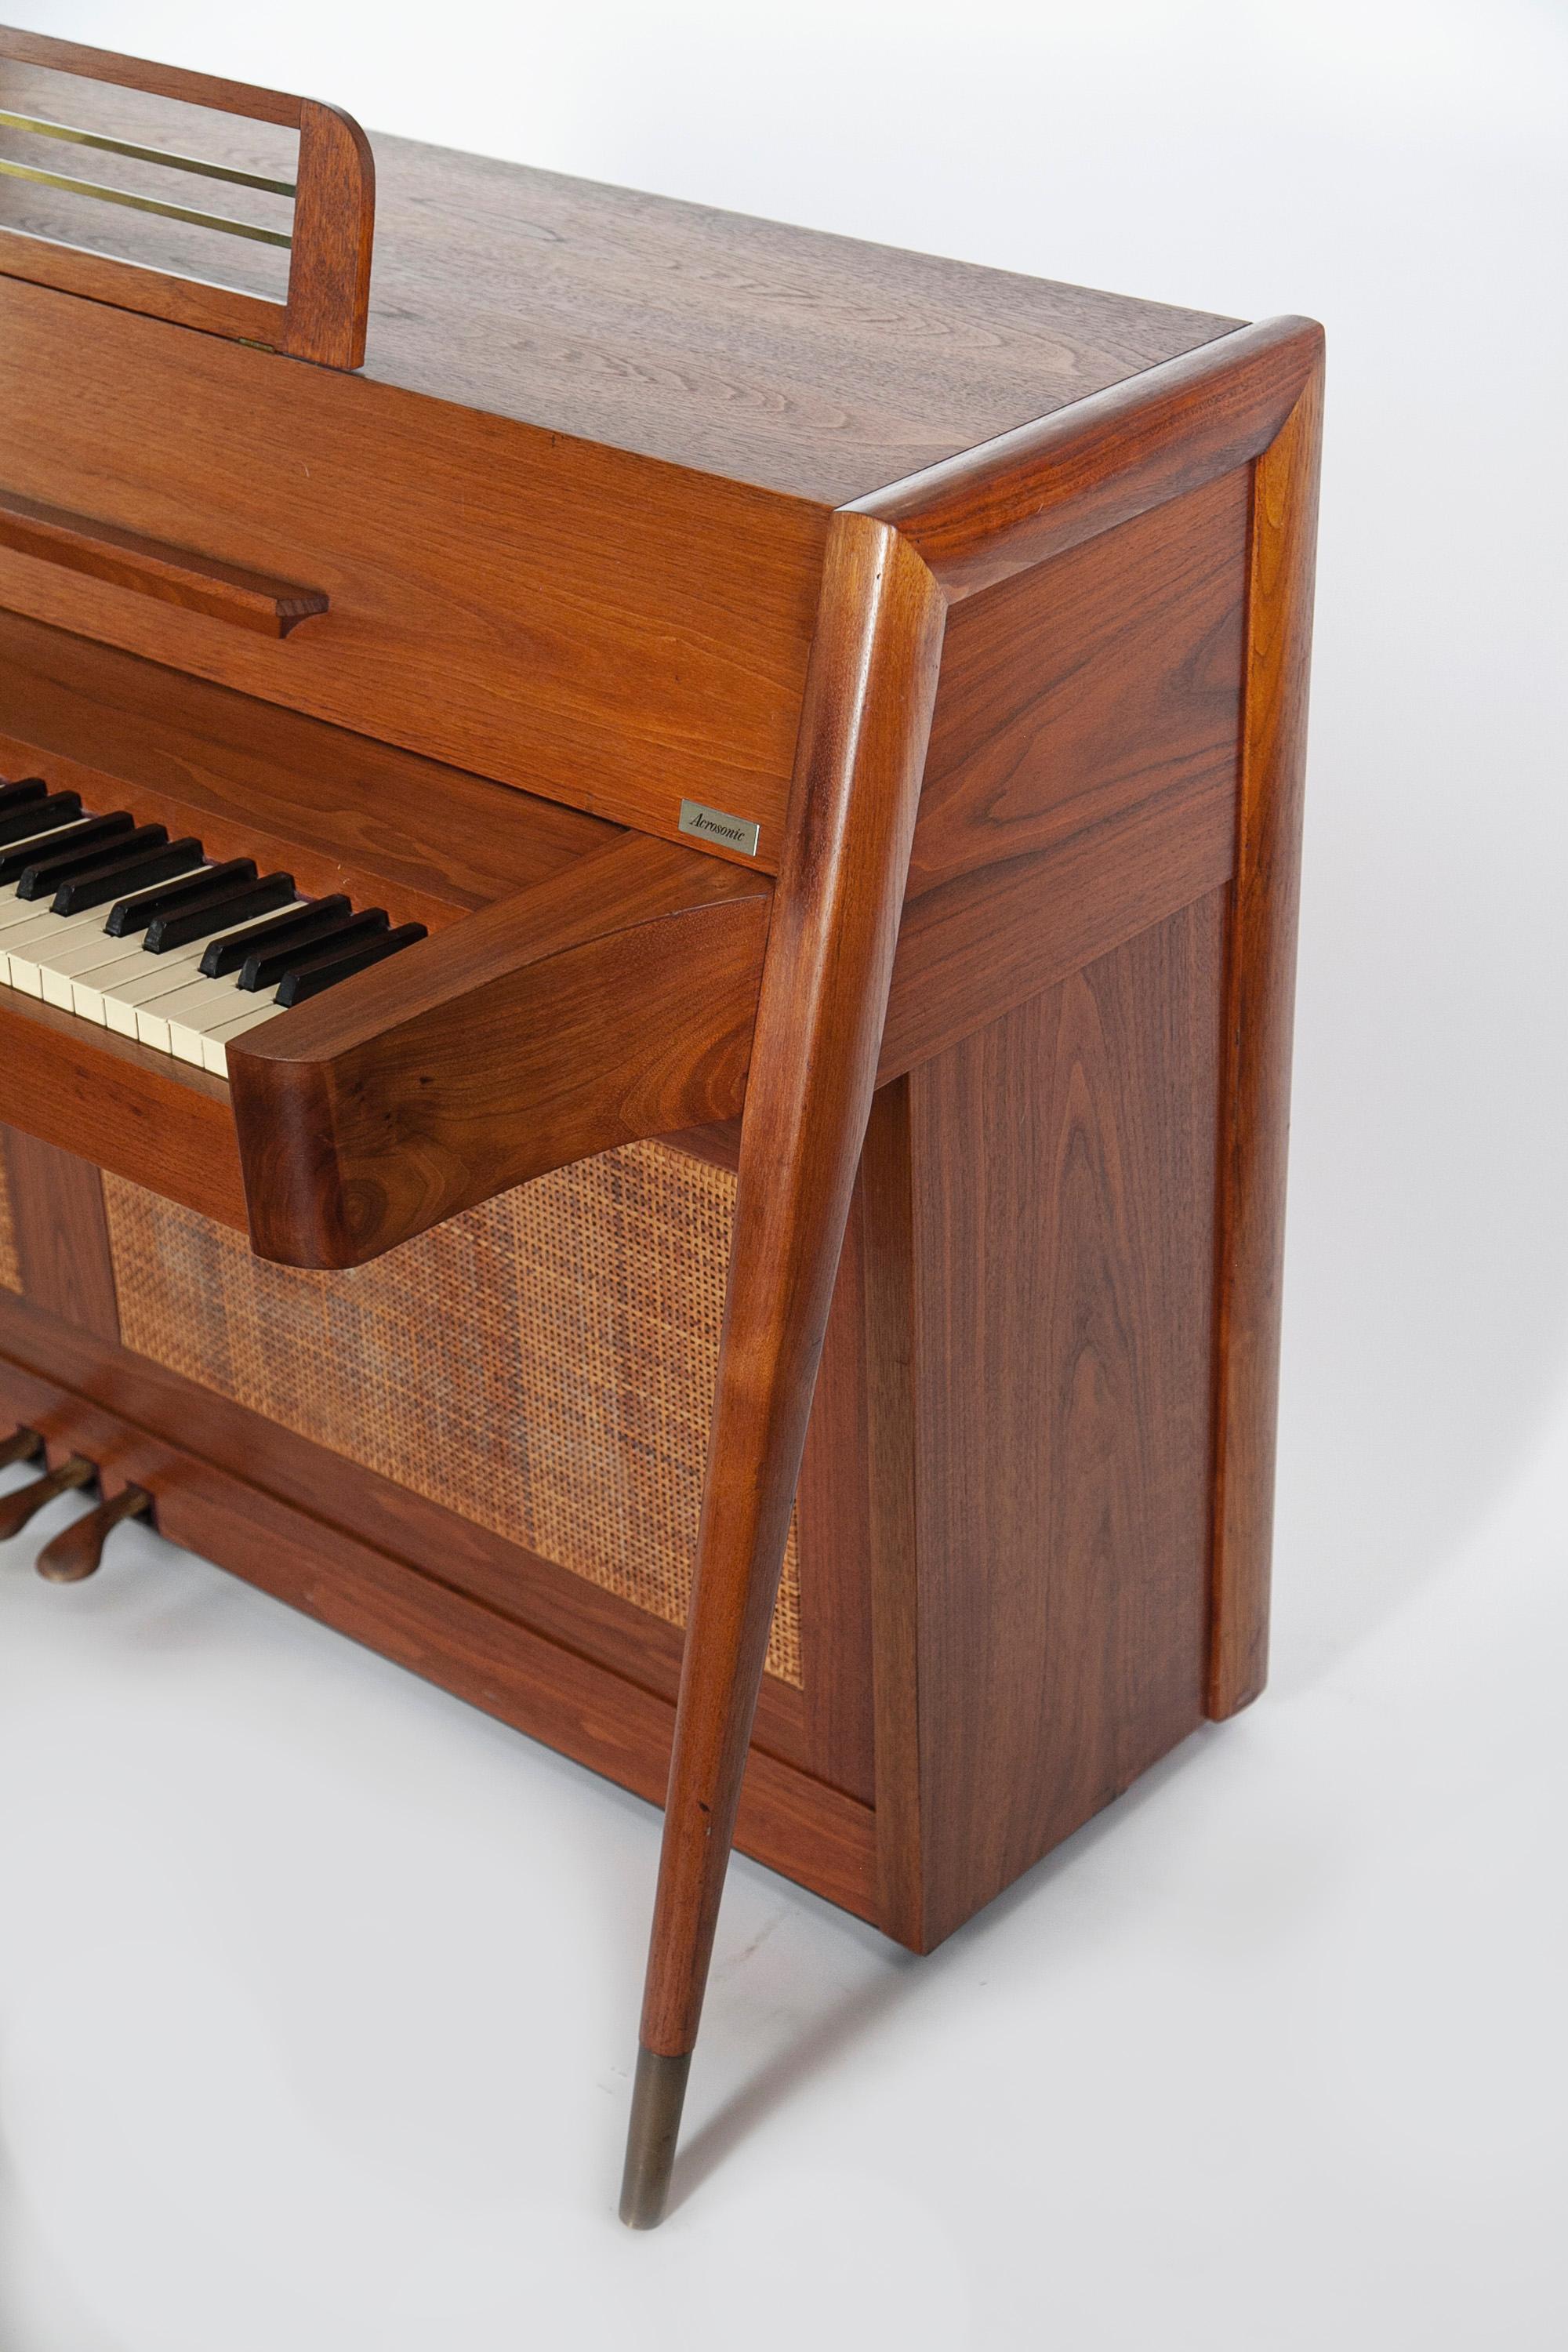 Mid-Century Modern Baldwin Acrosonic Piano in Walnut and Caning - 1960's

This Mid-Century modern Acrosonic spinet piano made by Baldwin is very sought after and is an amazing addition to any home. It's signature Danish style modern tapered leg